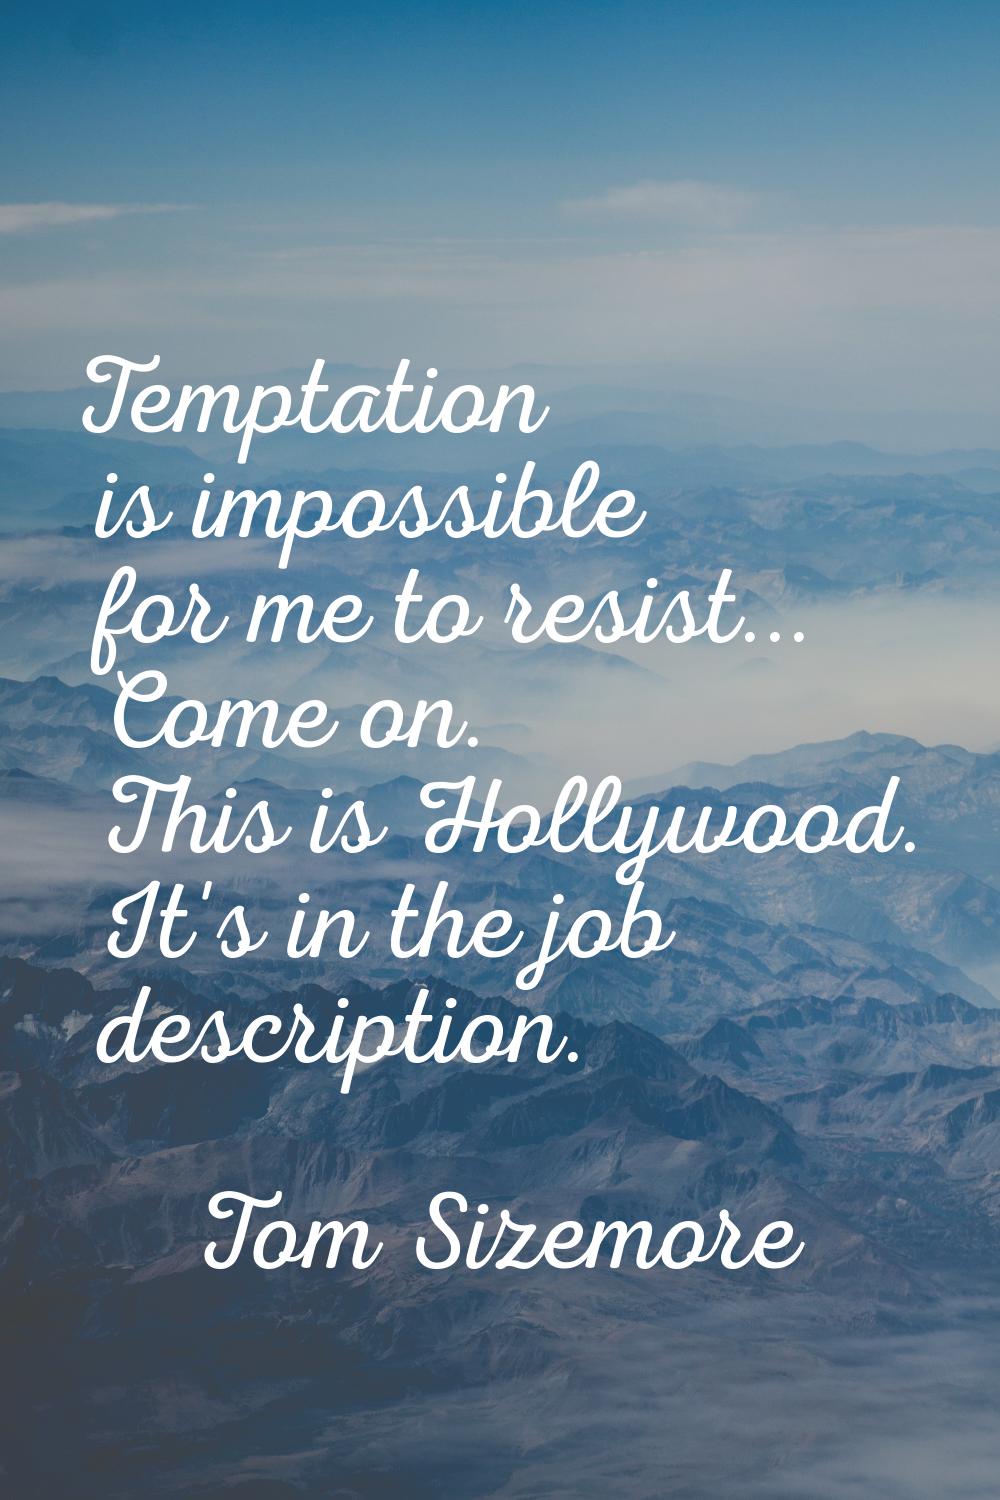 Temptation is impossible for me to resist... Come on. This is Hollywood. It's in the job descriptio